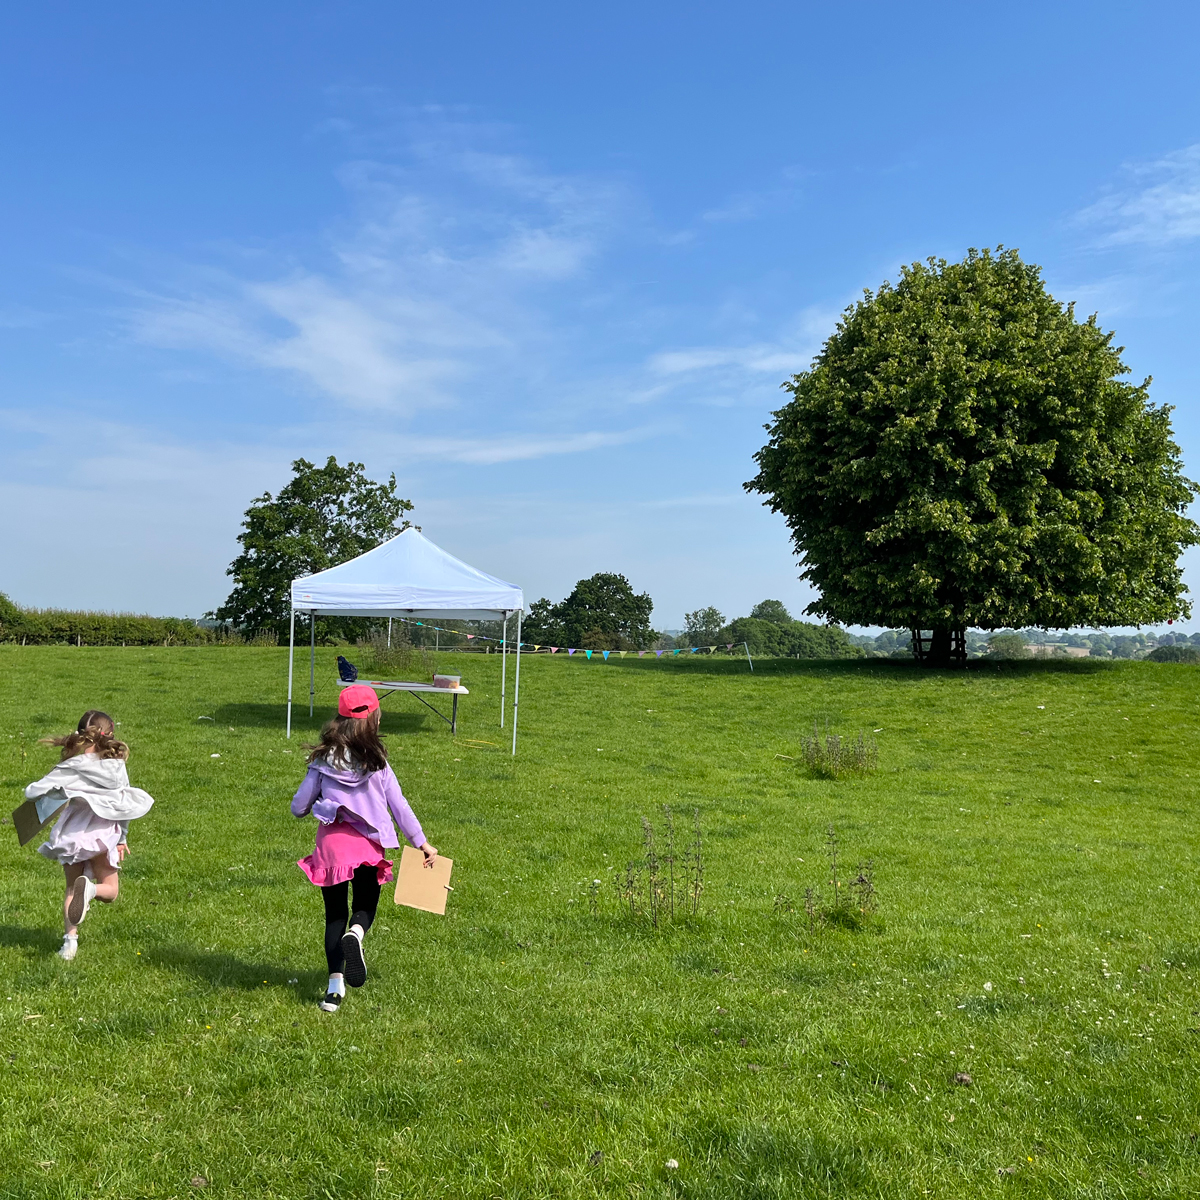 Photo of children running across a grassy field towards a white gazebo and a large tree